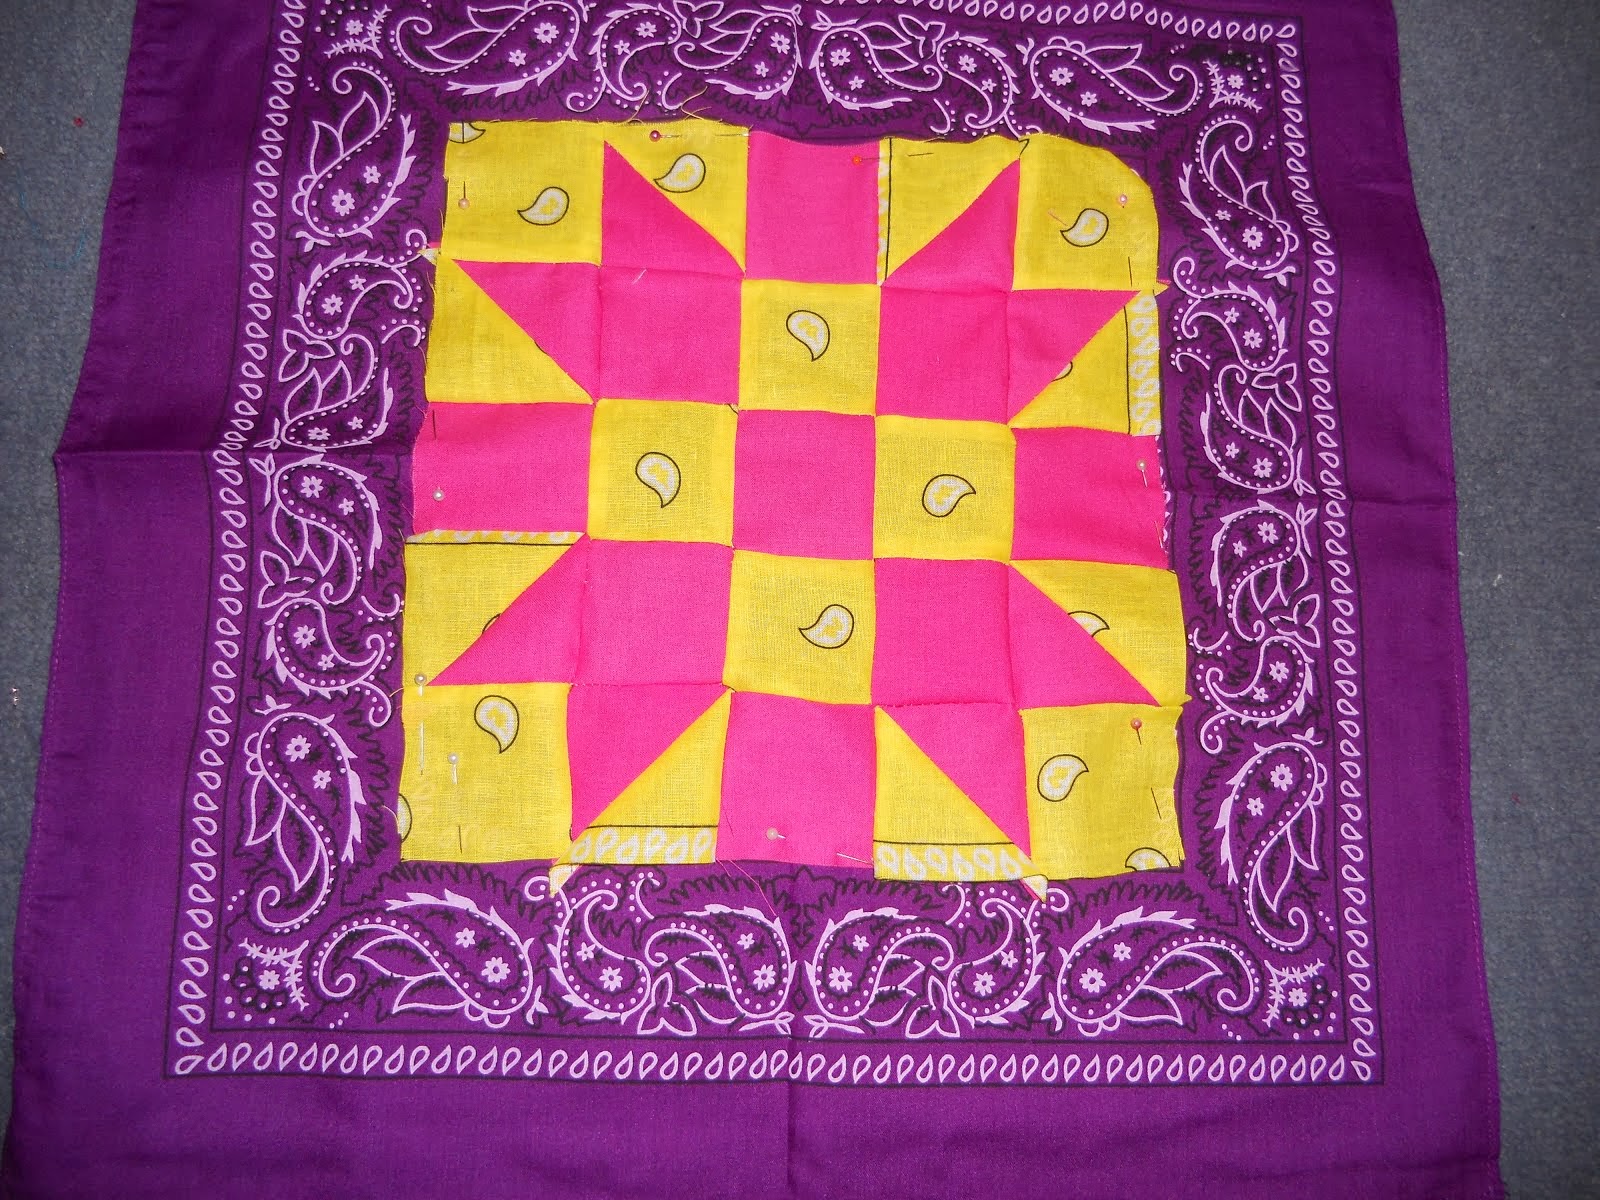 father's choice quilt block